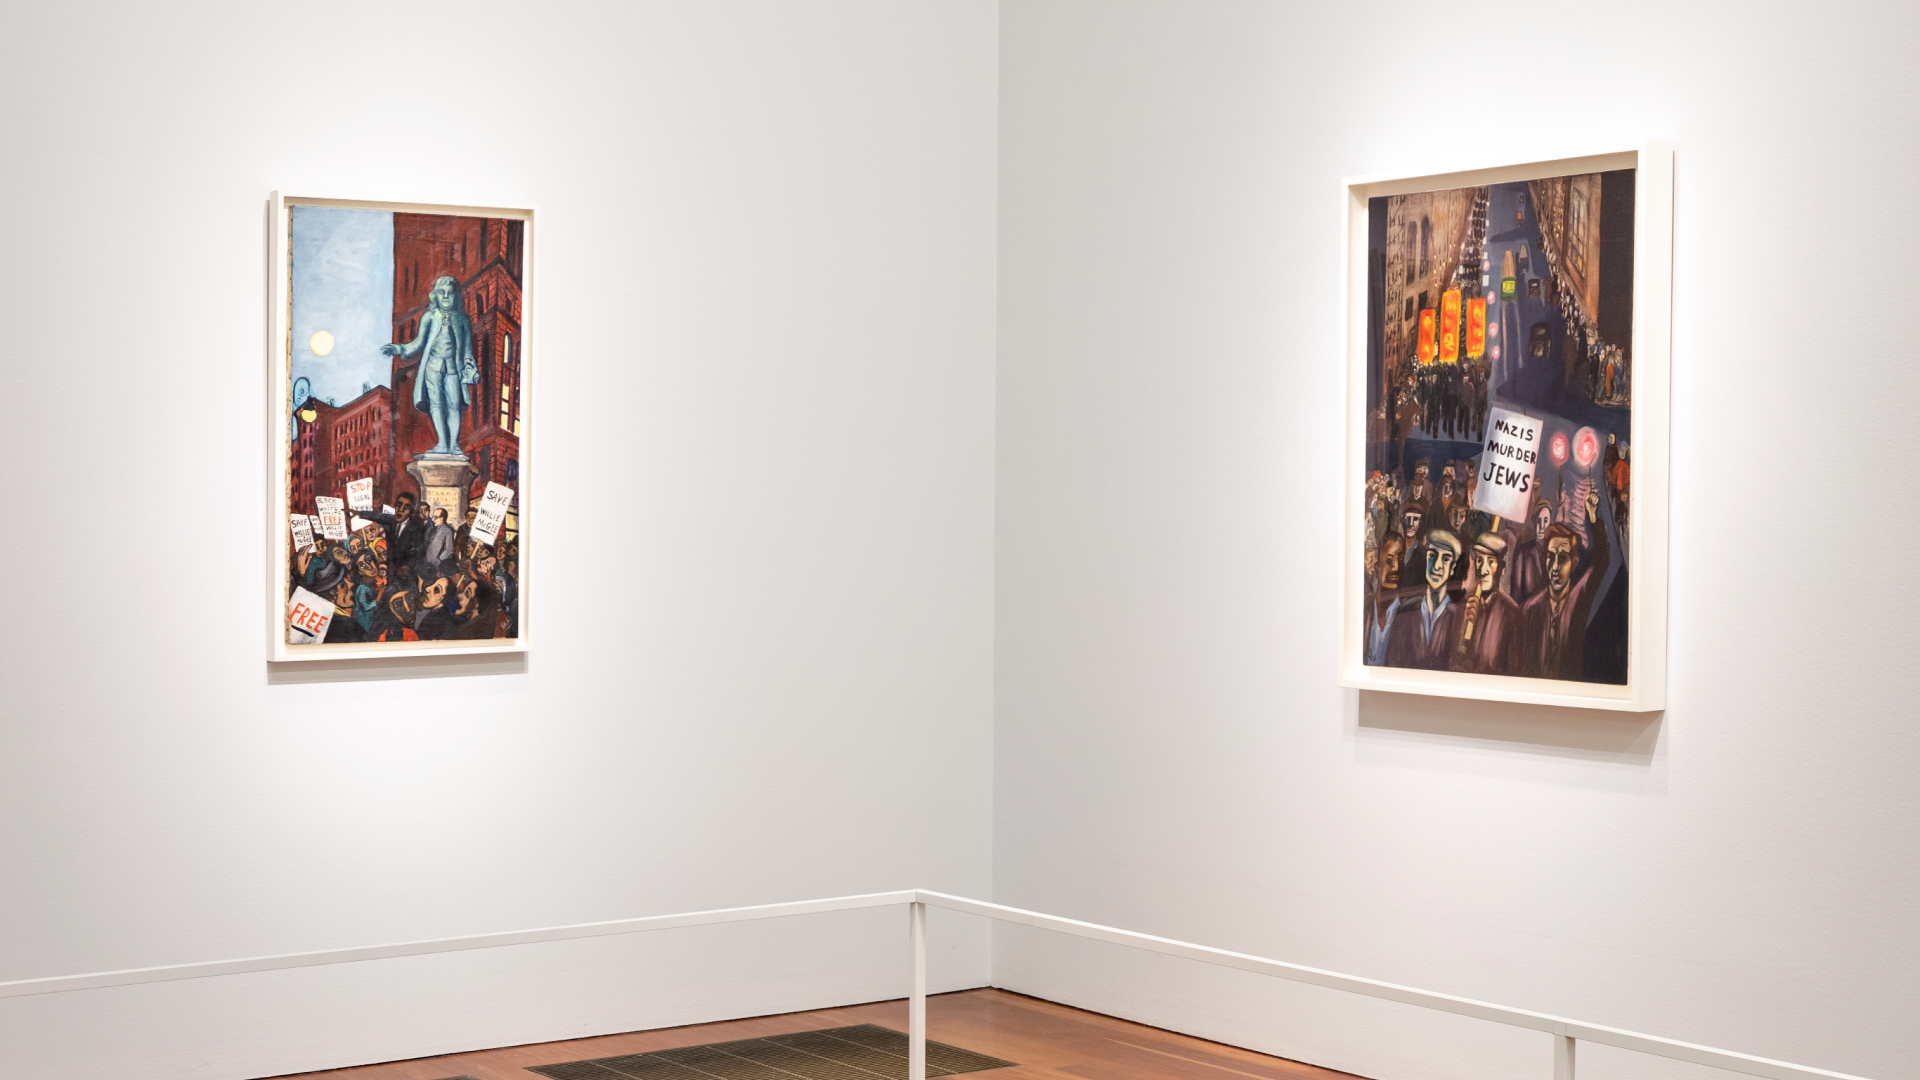 Installation view of the exhibition, Alice Neel: People Come First, at de Young Museum in San Francisco, dated 2022.